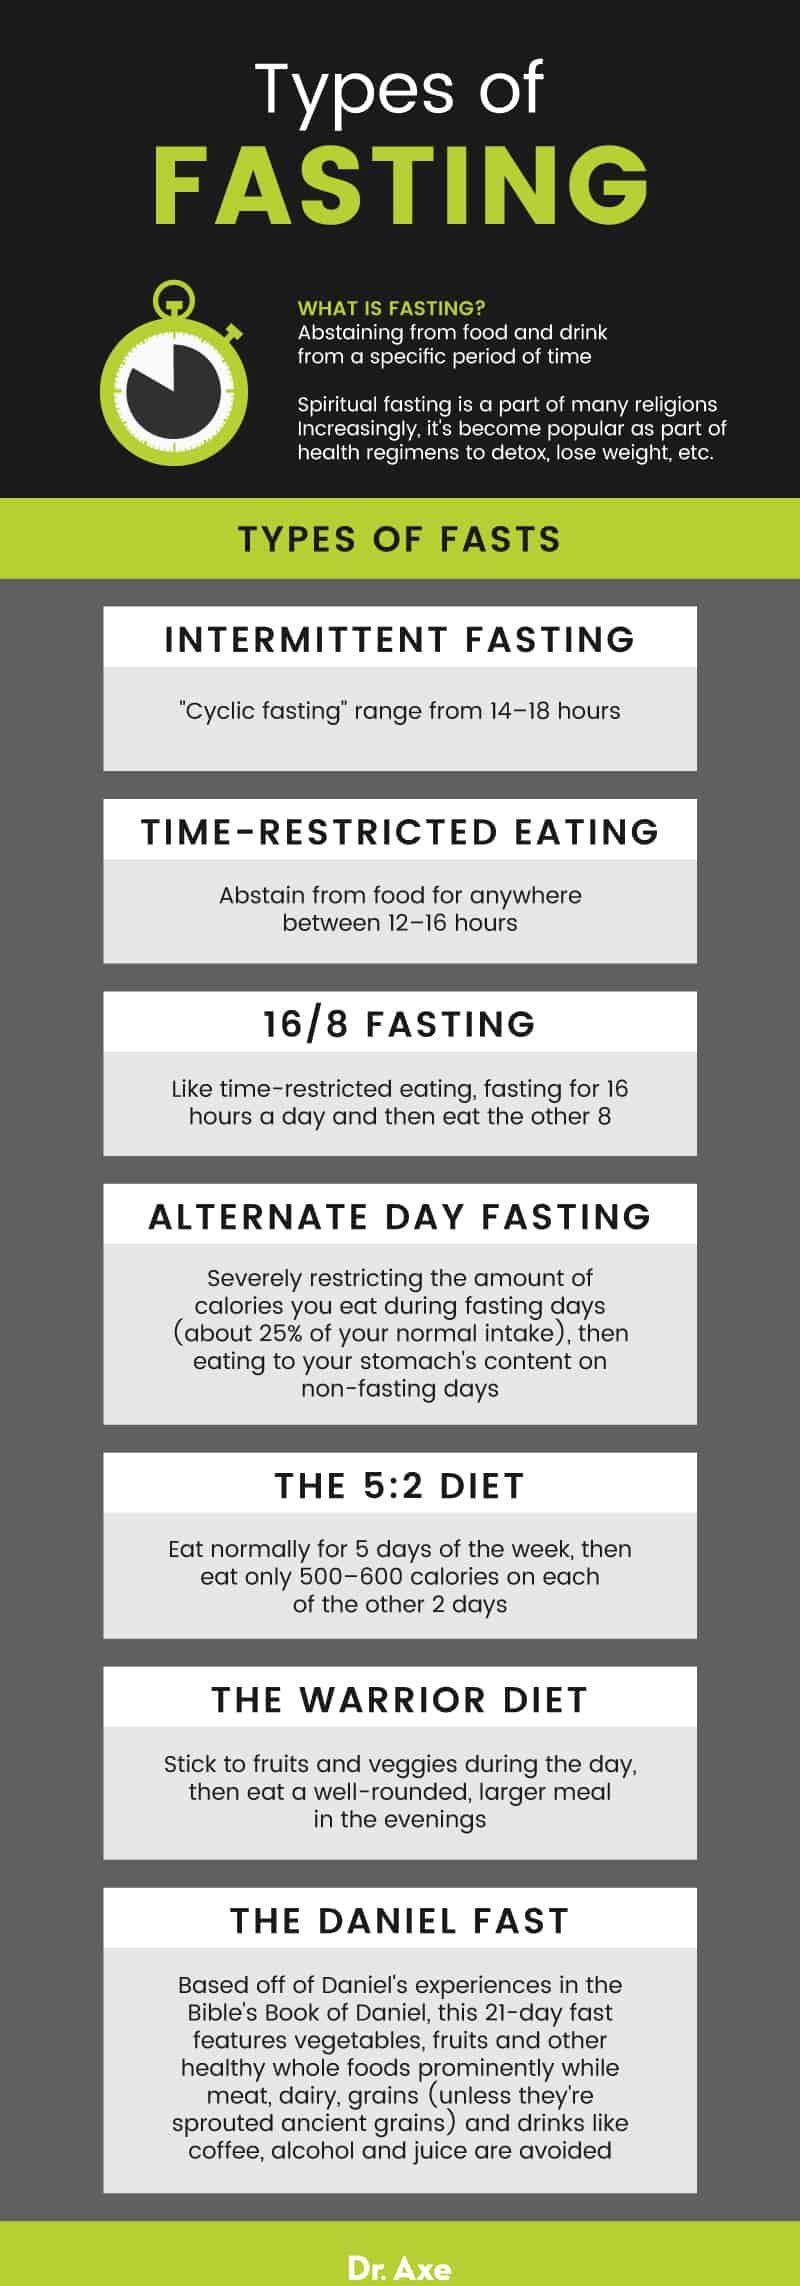 Benefits of Fasting, Plus Types, How to Fast, Side Effects - Dr. Axe